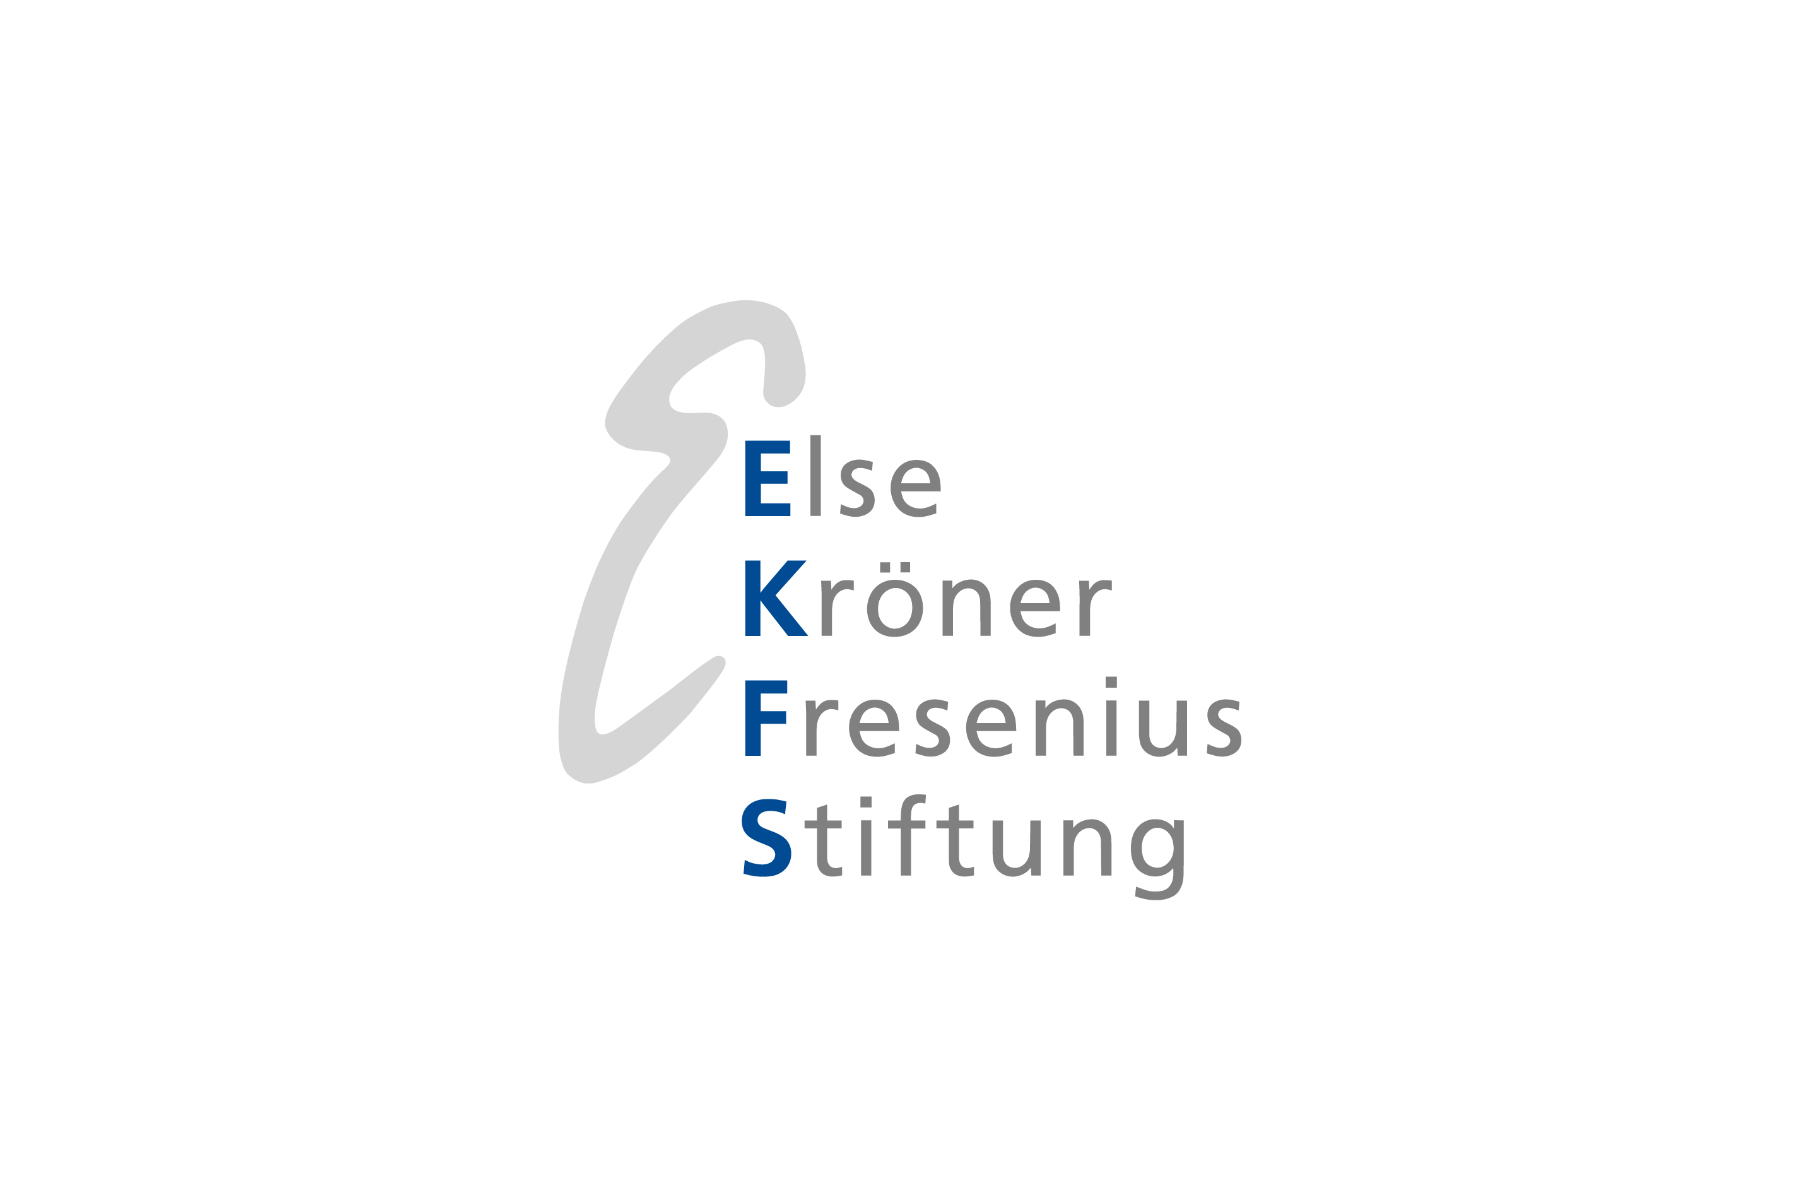 The picture shows the logo of the Else Kröner-Fresenius-Stiftung.